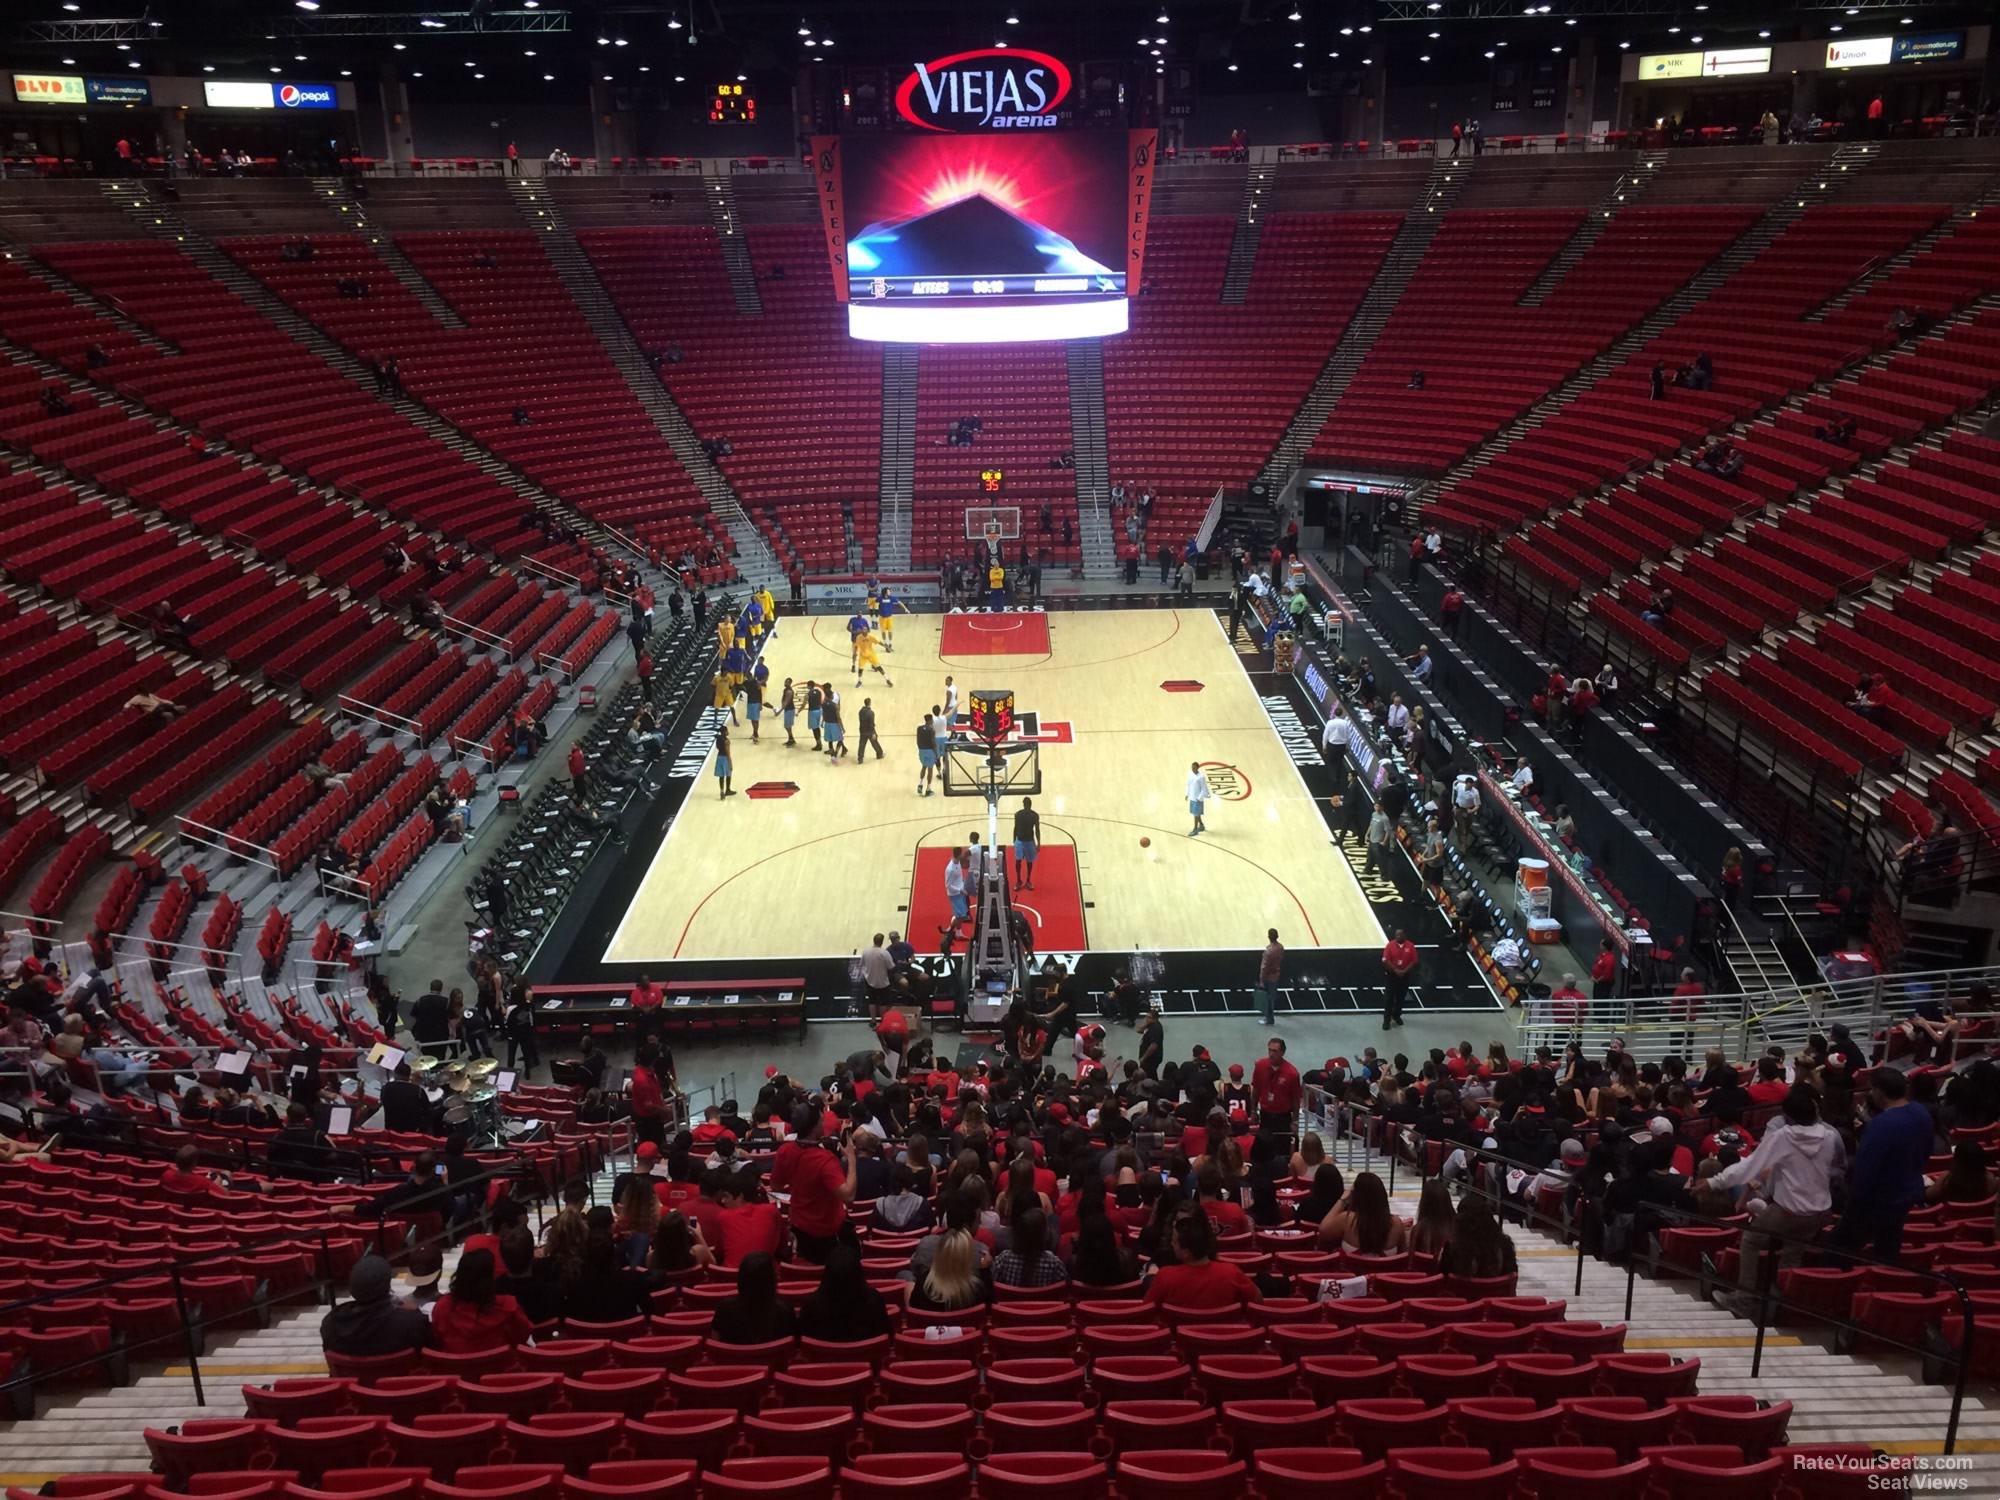 section l, row 30 seat view  - viejas arena